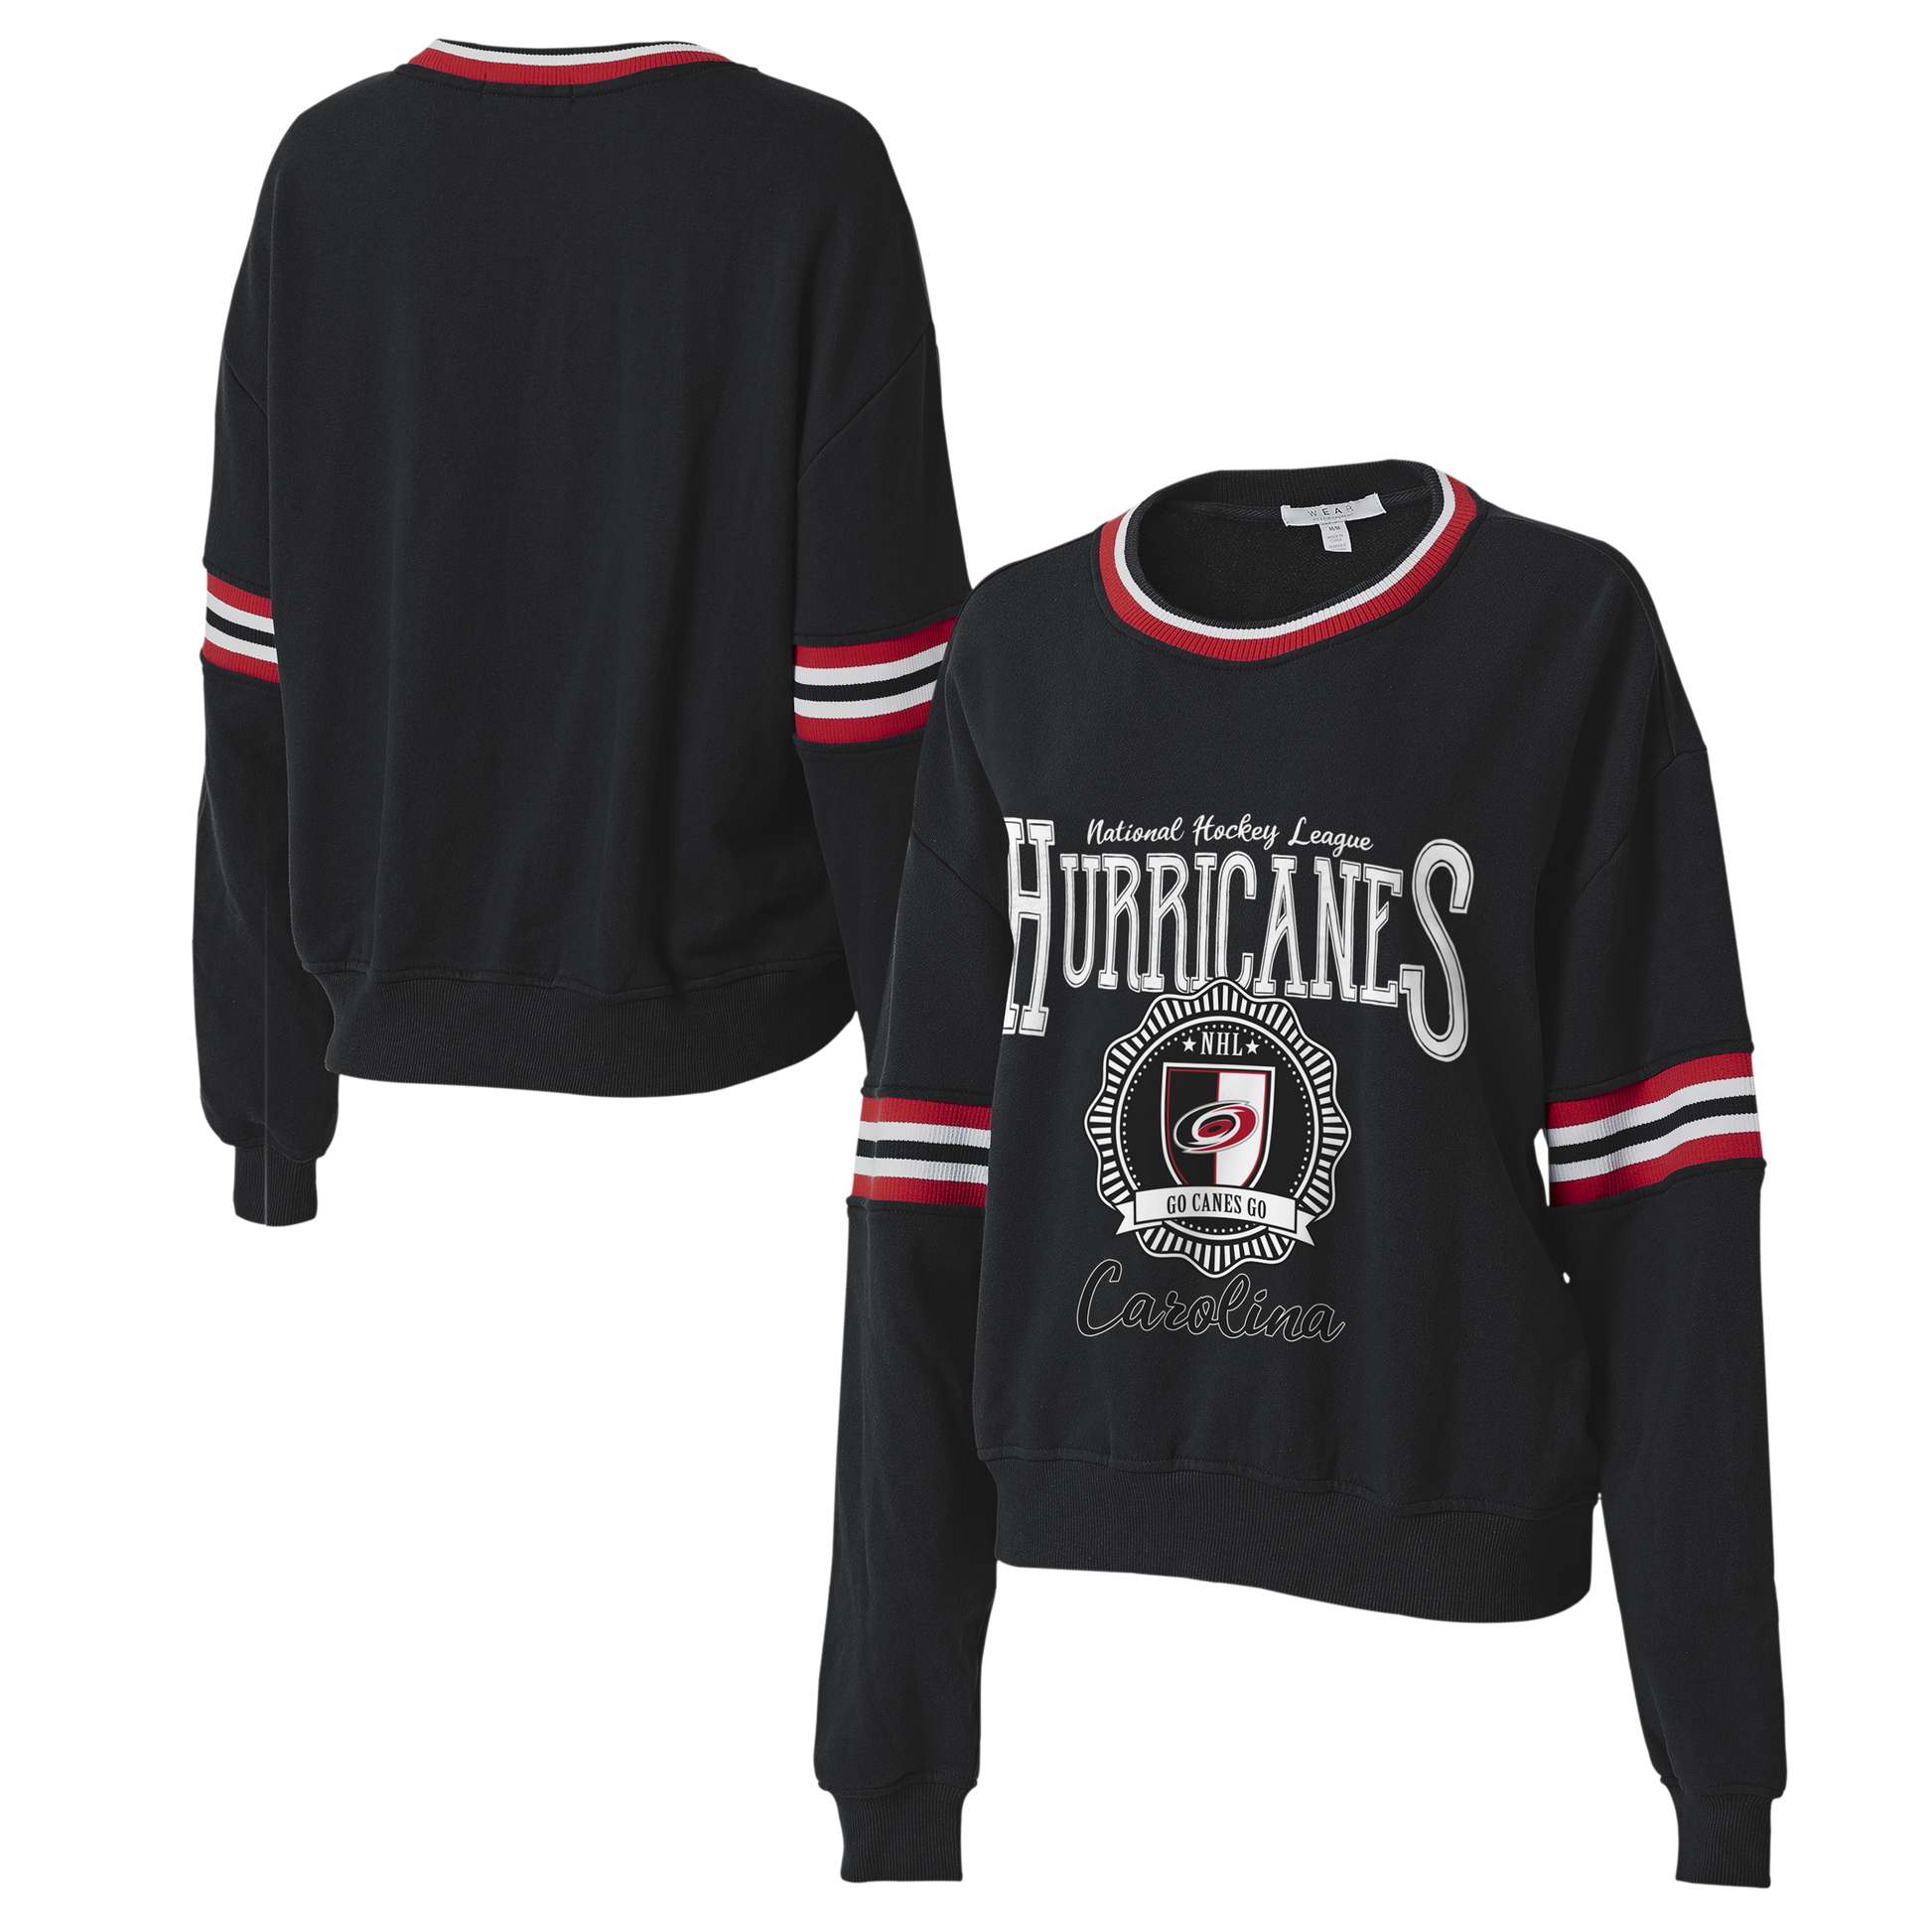 Front & Back: Black crewneck with striping on sleeves and graphic on front